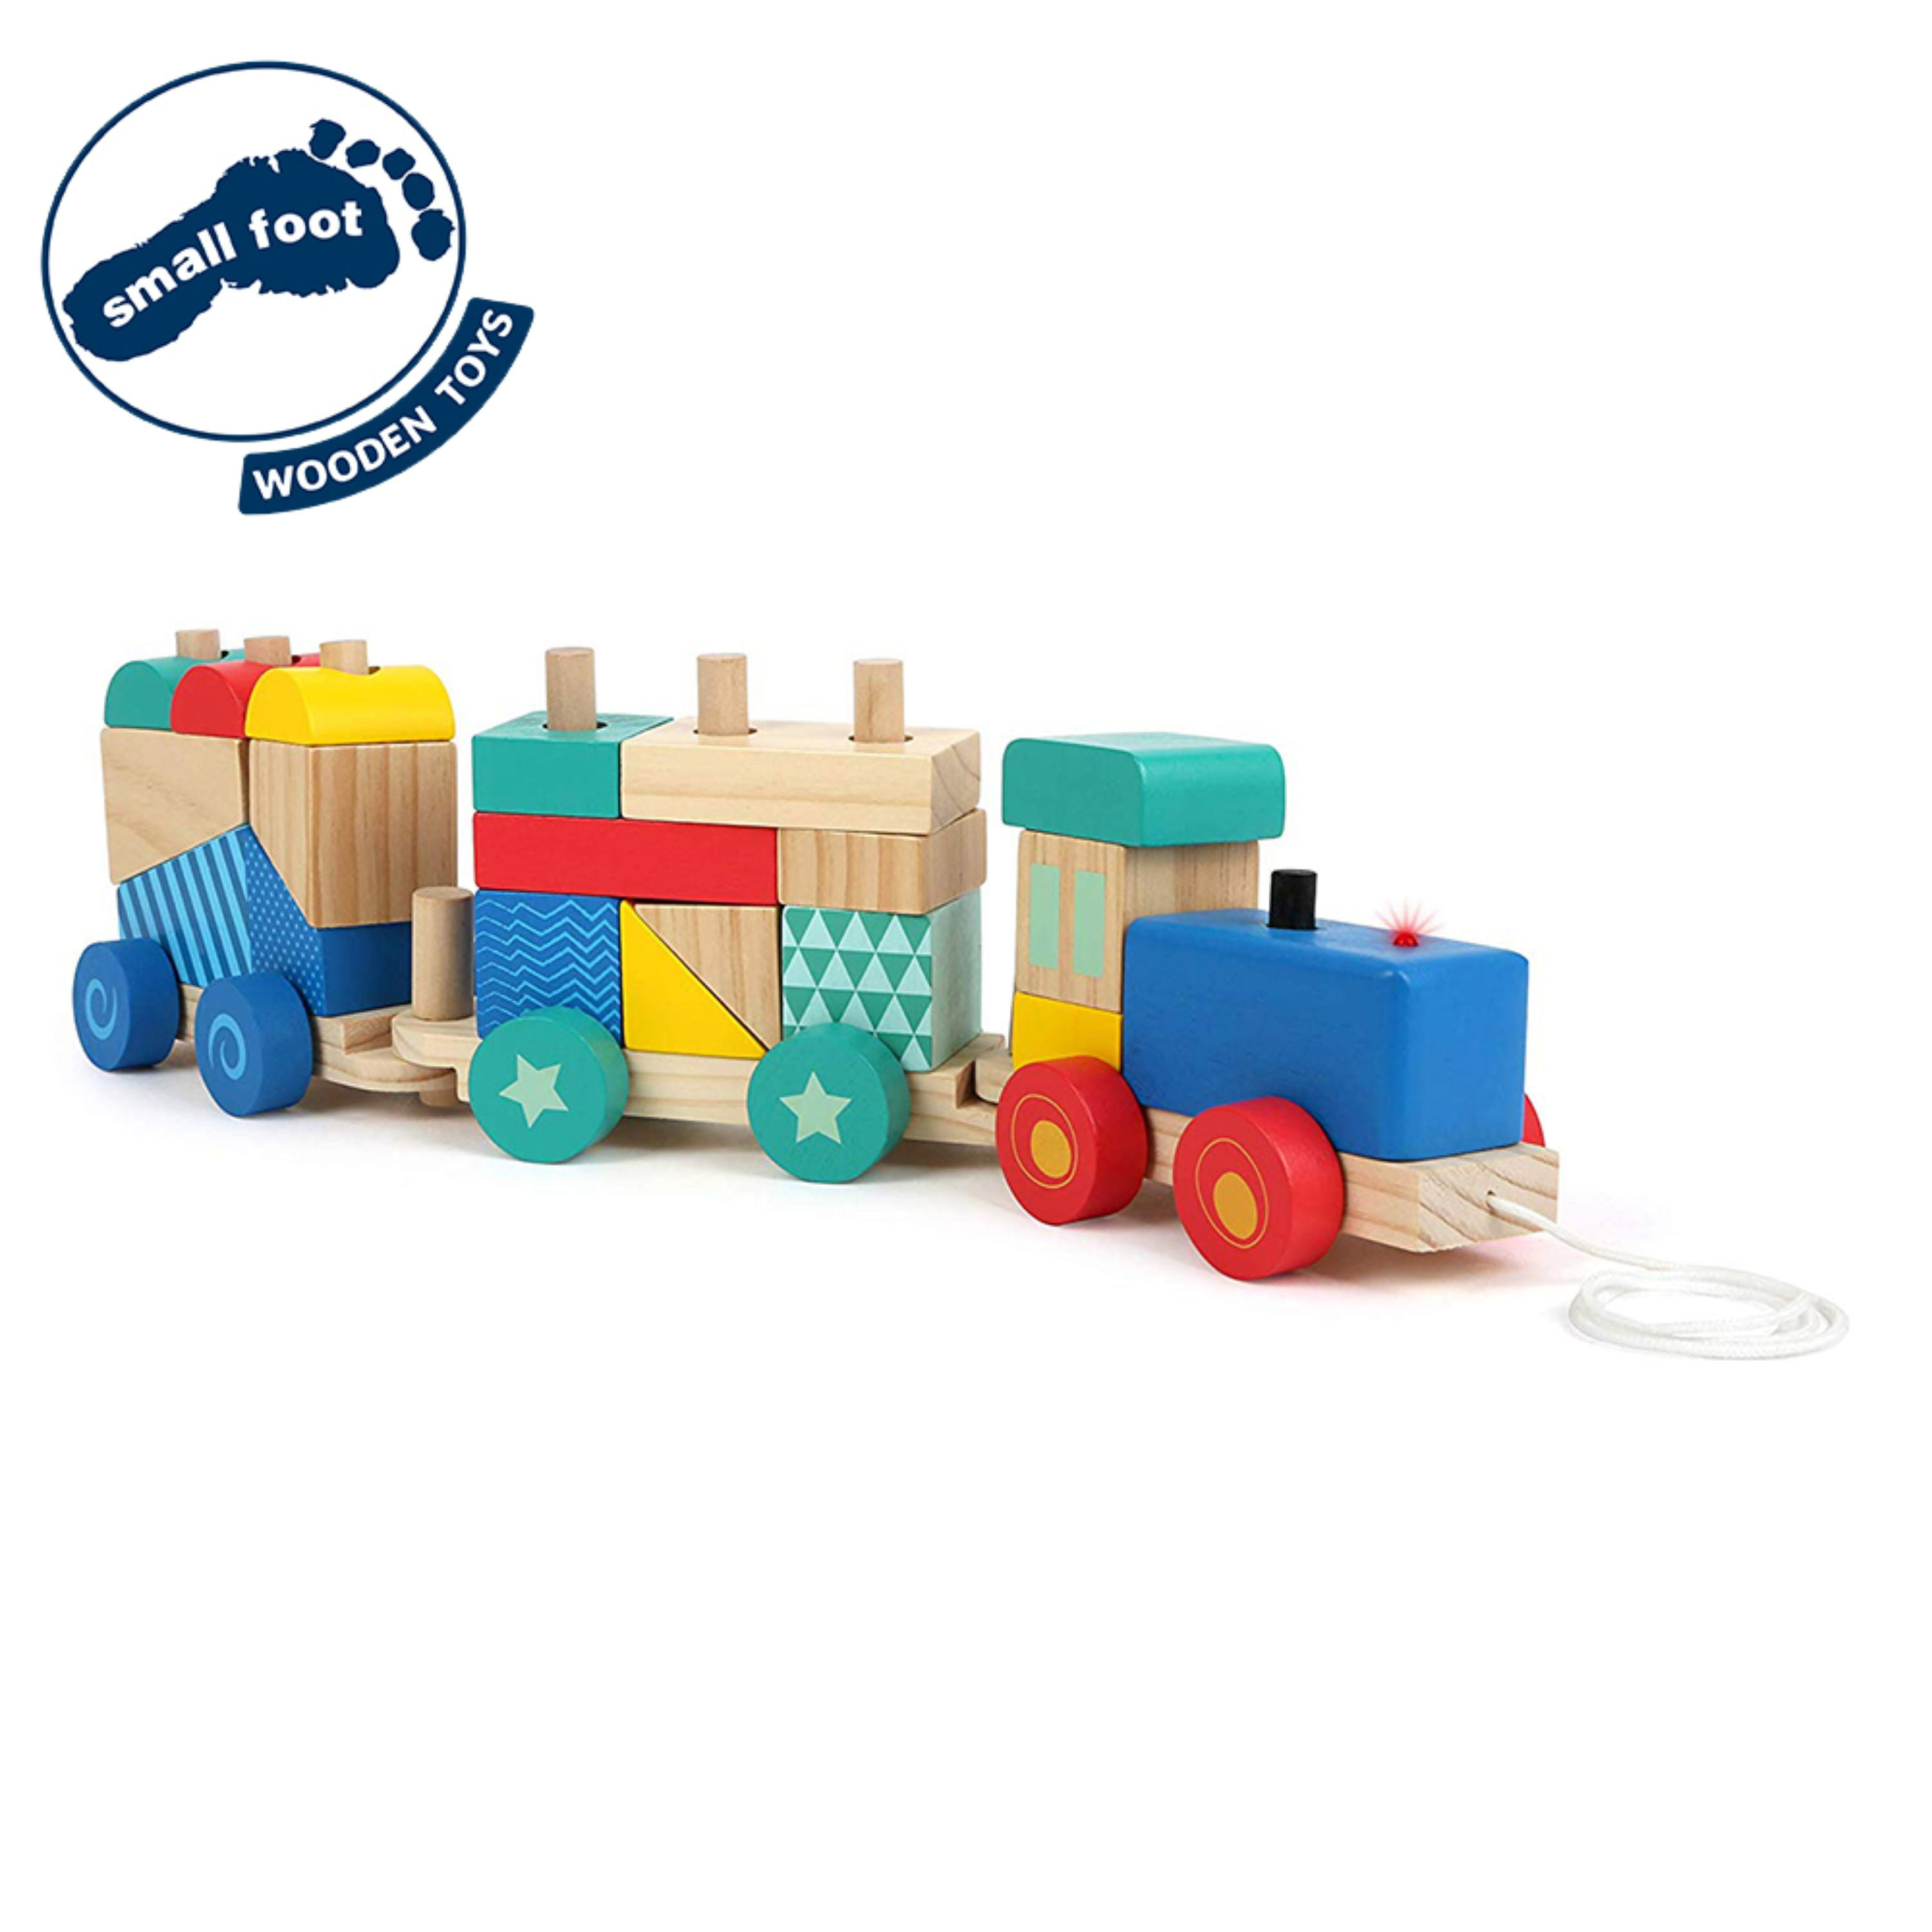 NEW CHILDREN'S WOODEN SMALL FOOT PULL ALONG TRAIN BRIGHT COLOURS BRAND NEW 